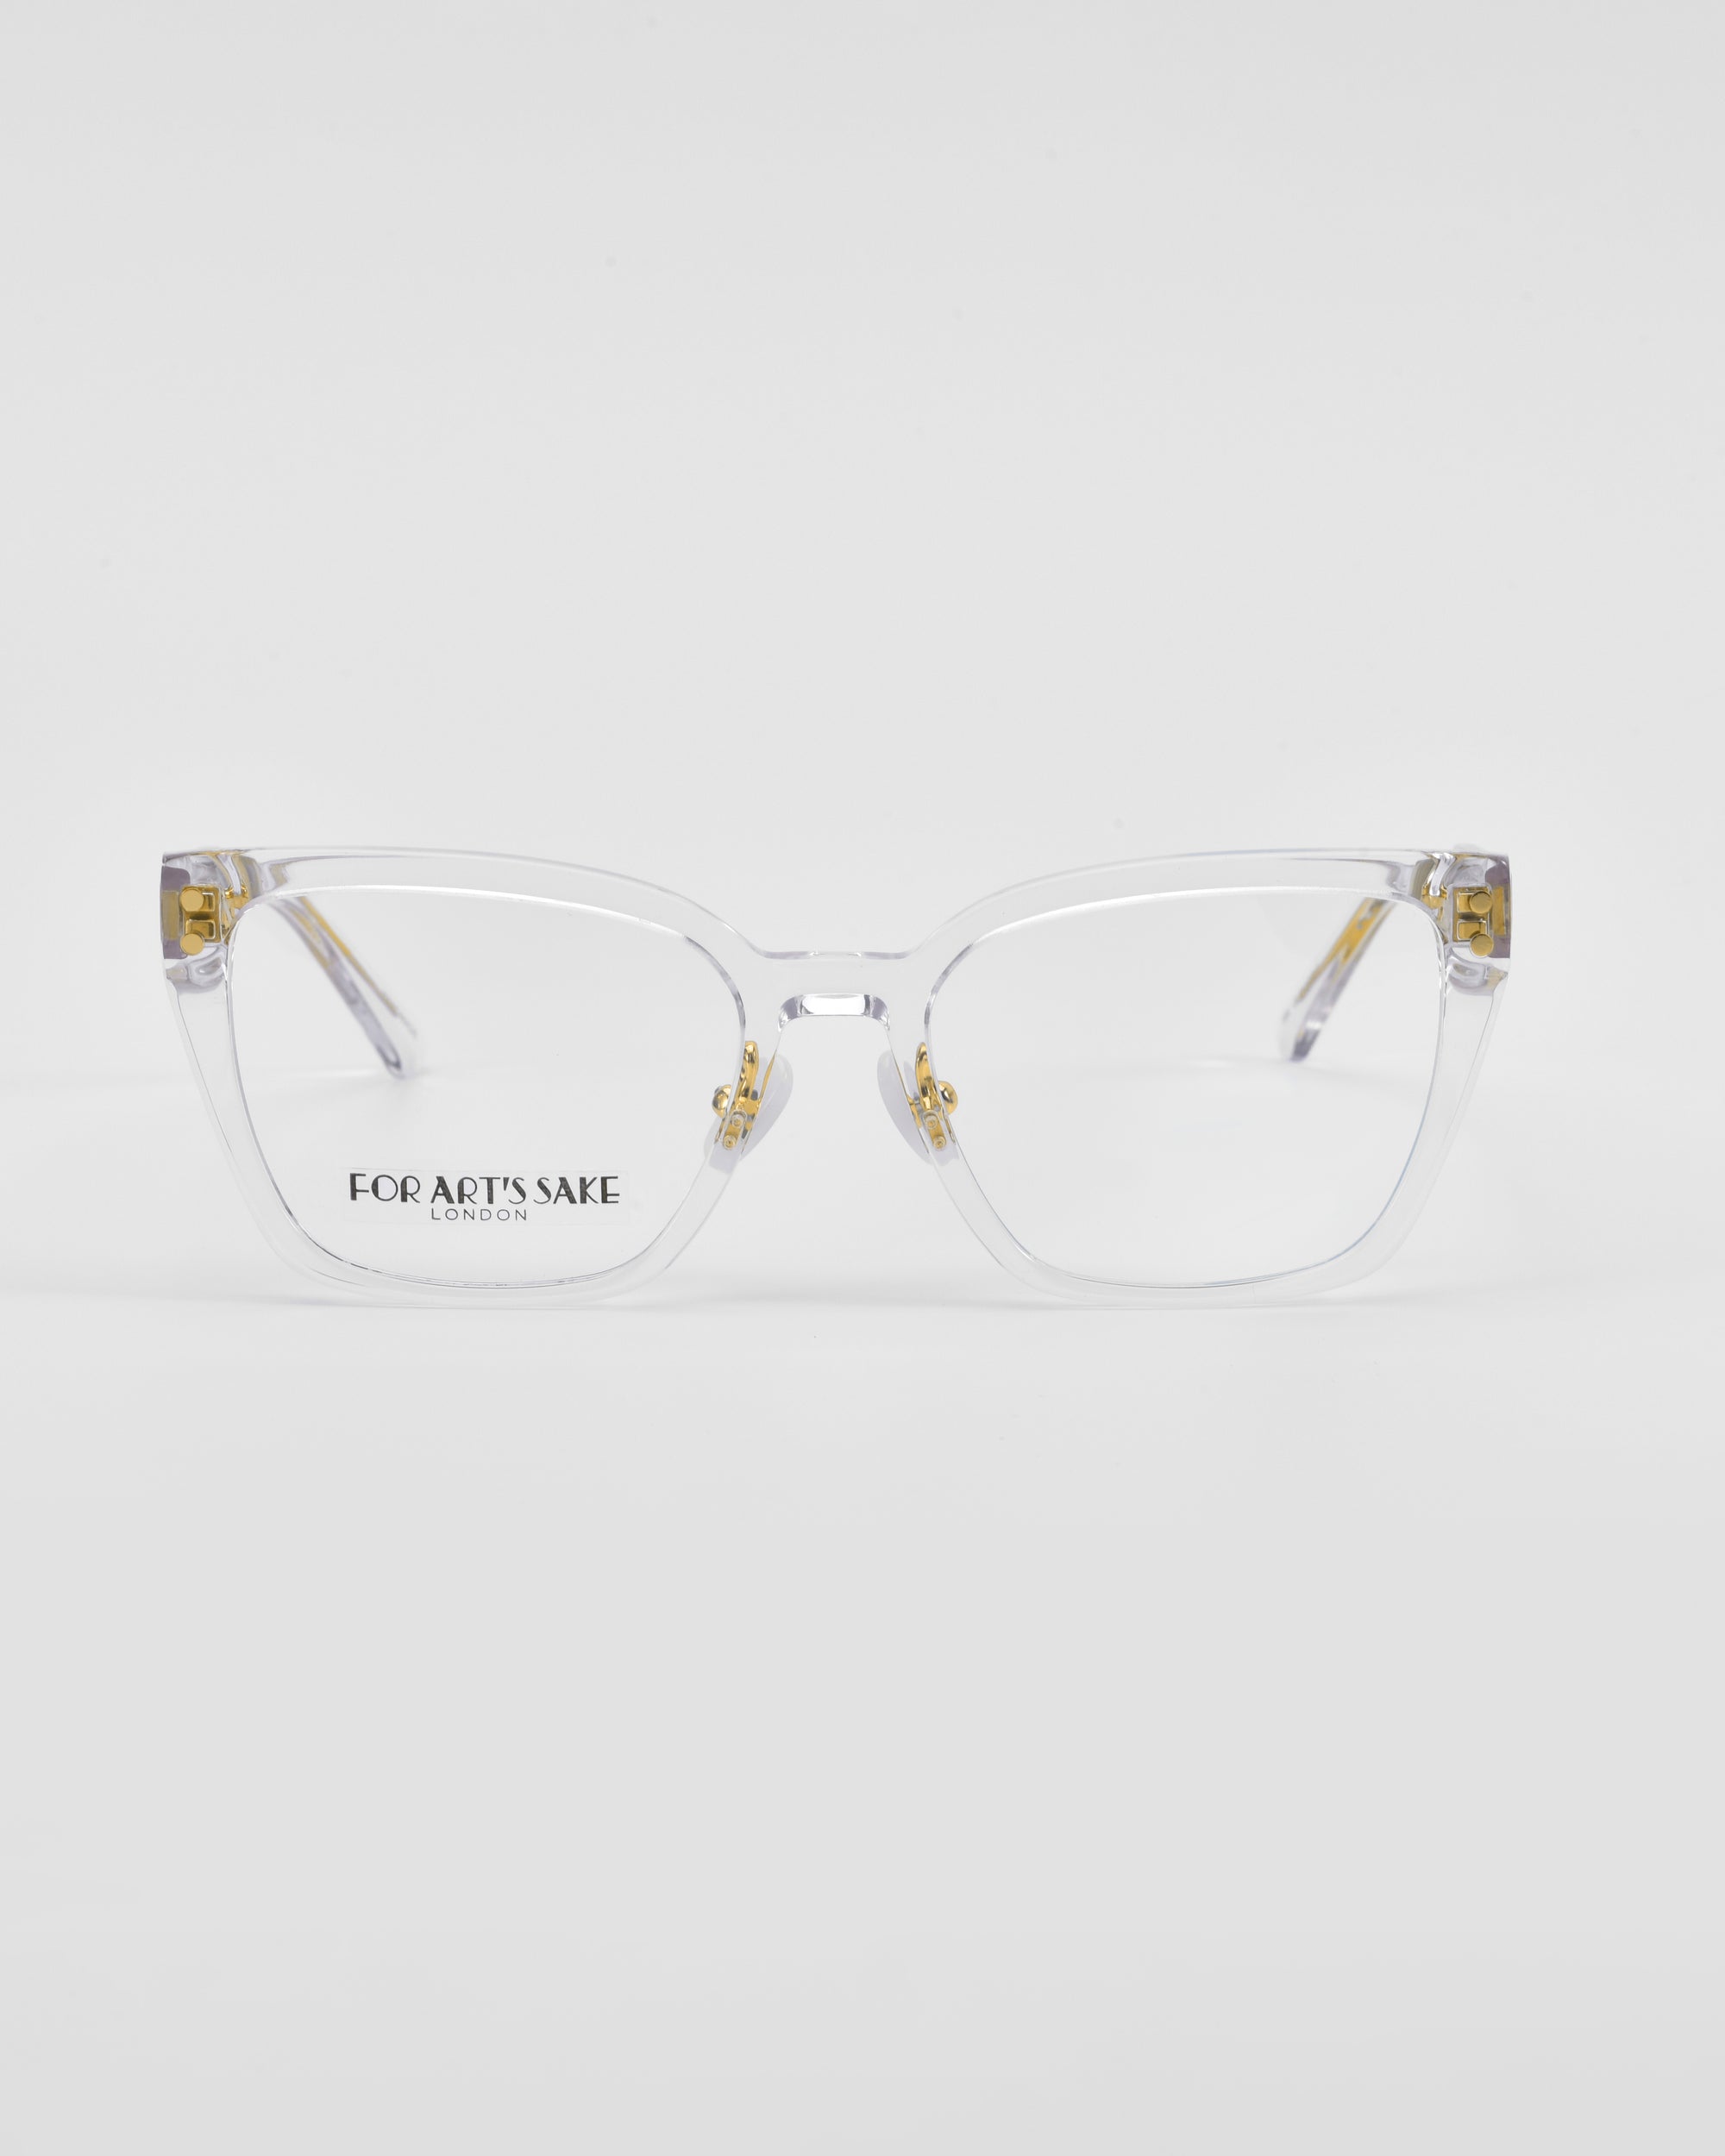 A pair of clear-framed Abbey eyeglasses with slightly oversized square lenses. The temples have a hint of gold-plated detail, and the brand For Art's Sake® is subtly printed on the inside of the right lens near the temple. The background is a plain white.